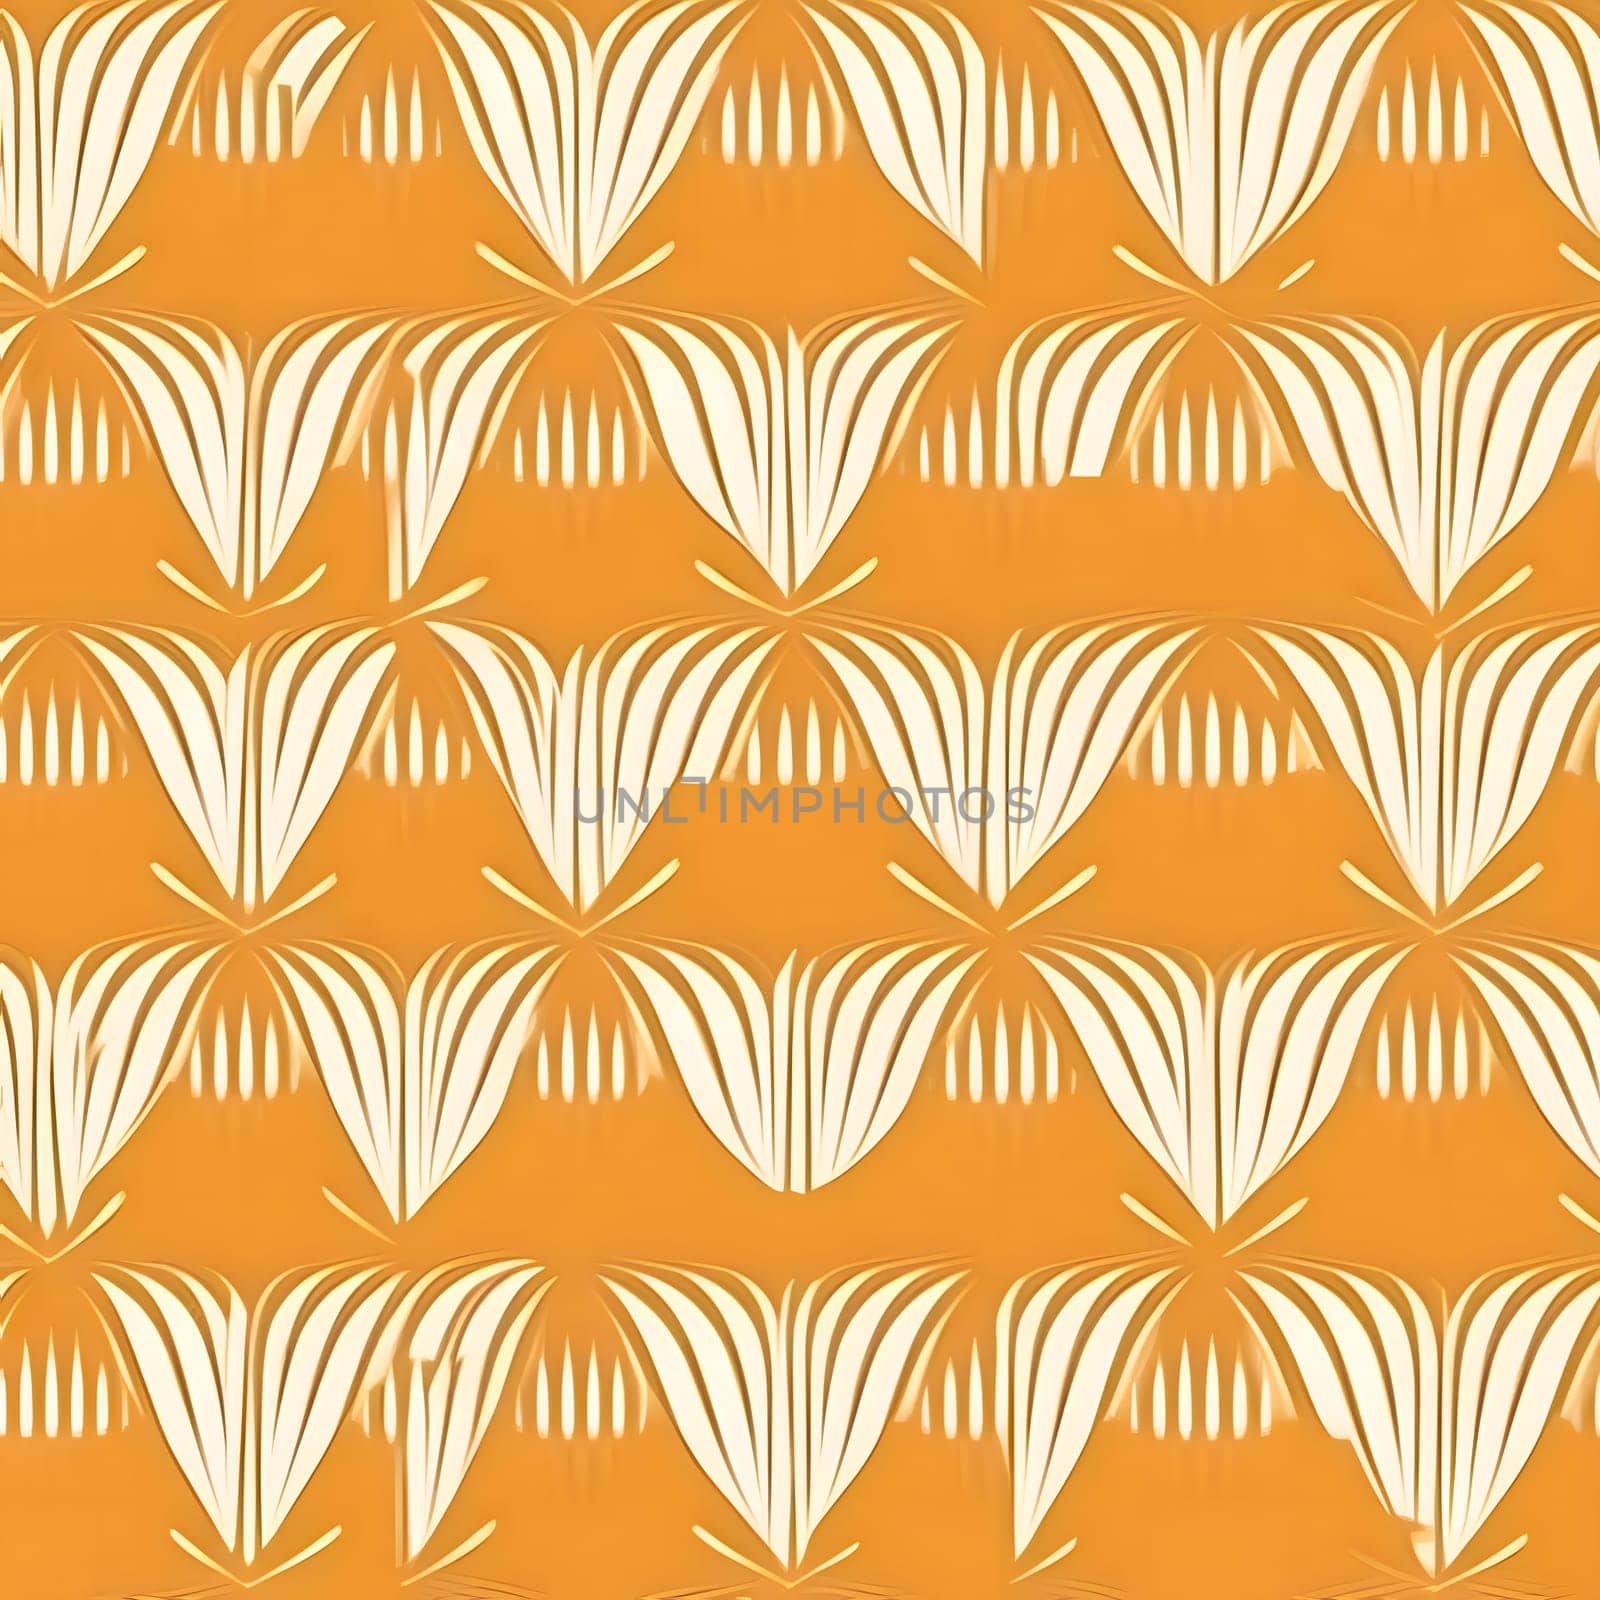 Patterns and banners backgrounds: Seamless background pattern. Decorative floral pattern. Vector illustration.